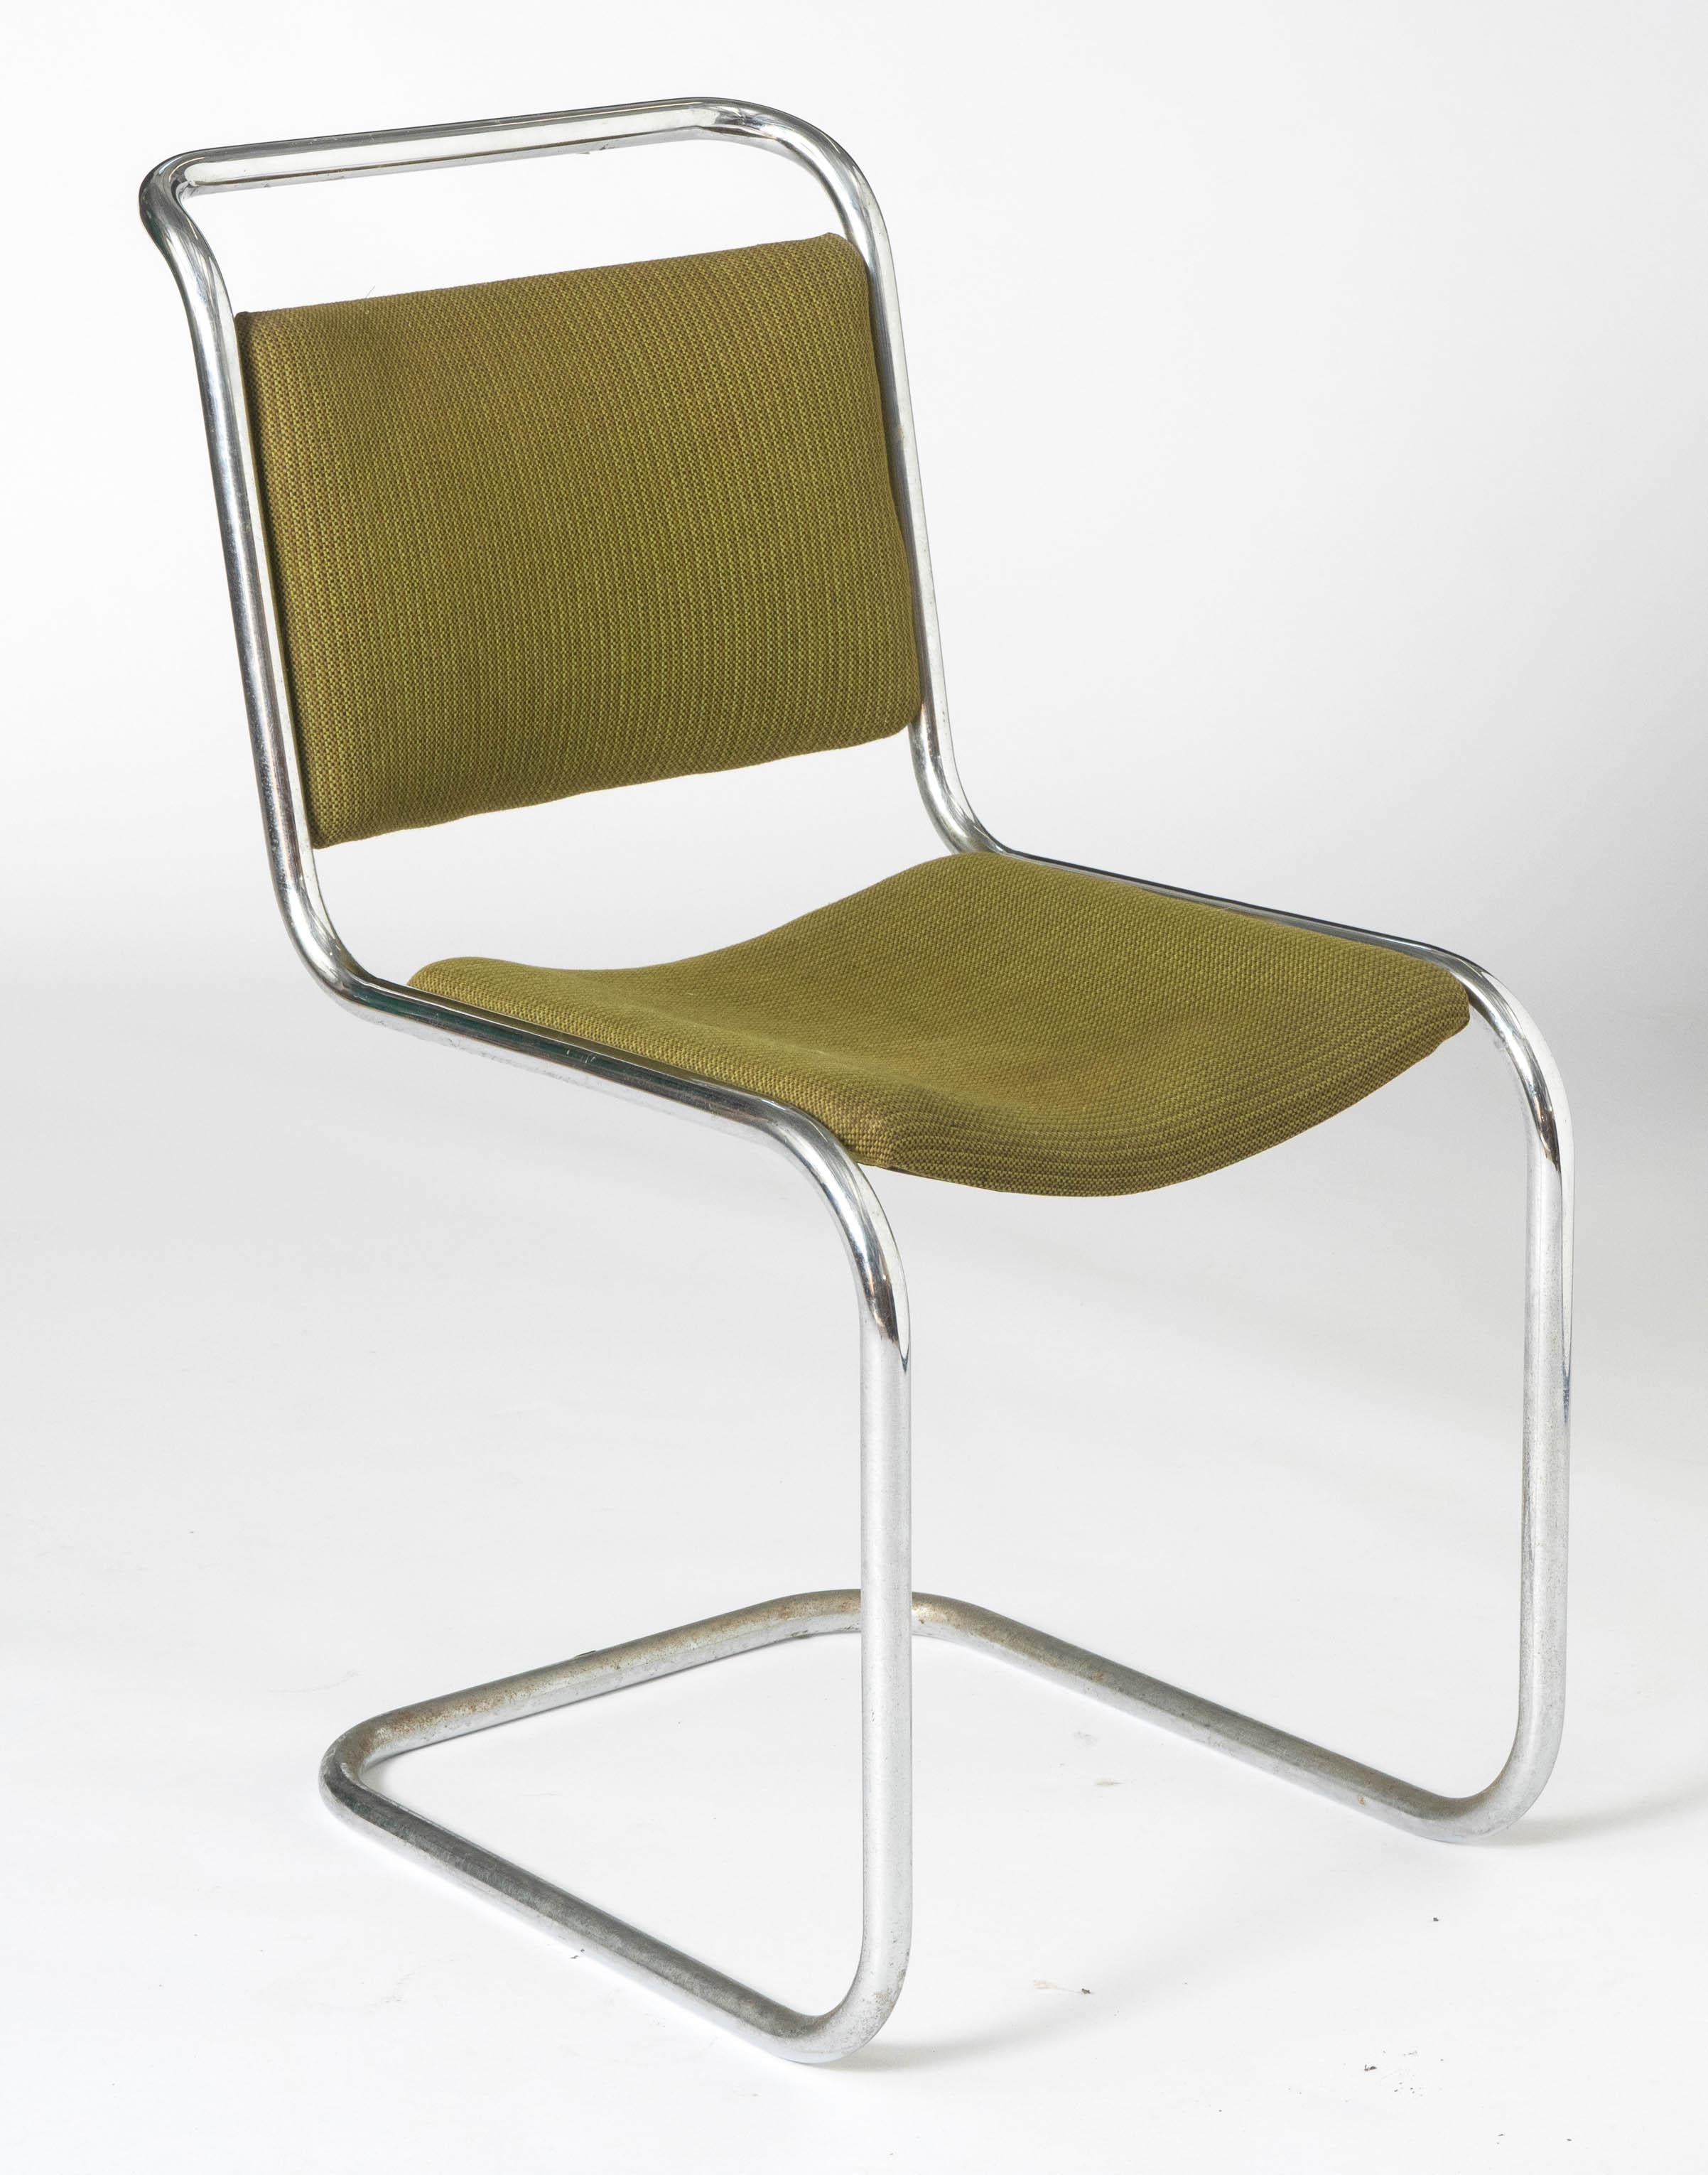 A set of 6 P.E.L (Practical Equipment Limited) British modernist chairs of cantilever form.
Designed by the Designer/ Architect Oliver Bernard.
Chrome plated tubular steel. Original fabric
England, circa 1931.
Measure: 81 cm high x 42 cm wide x